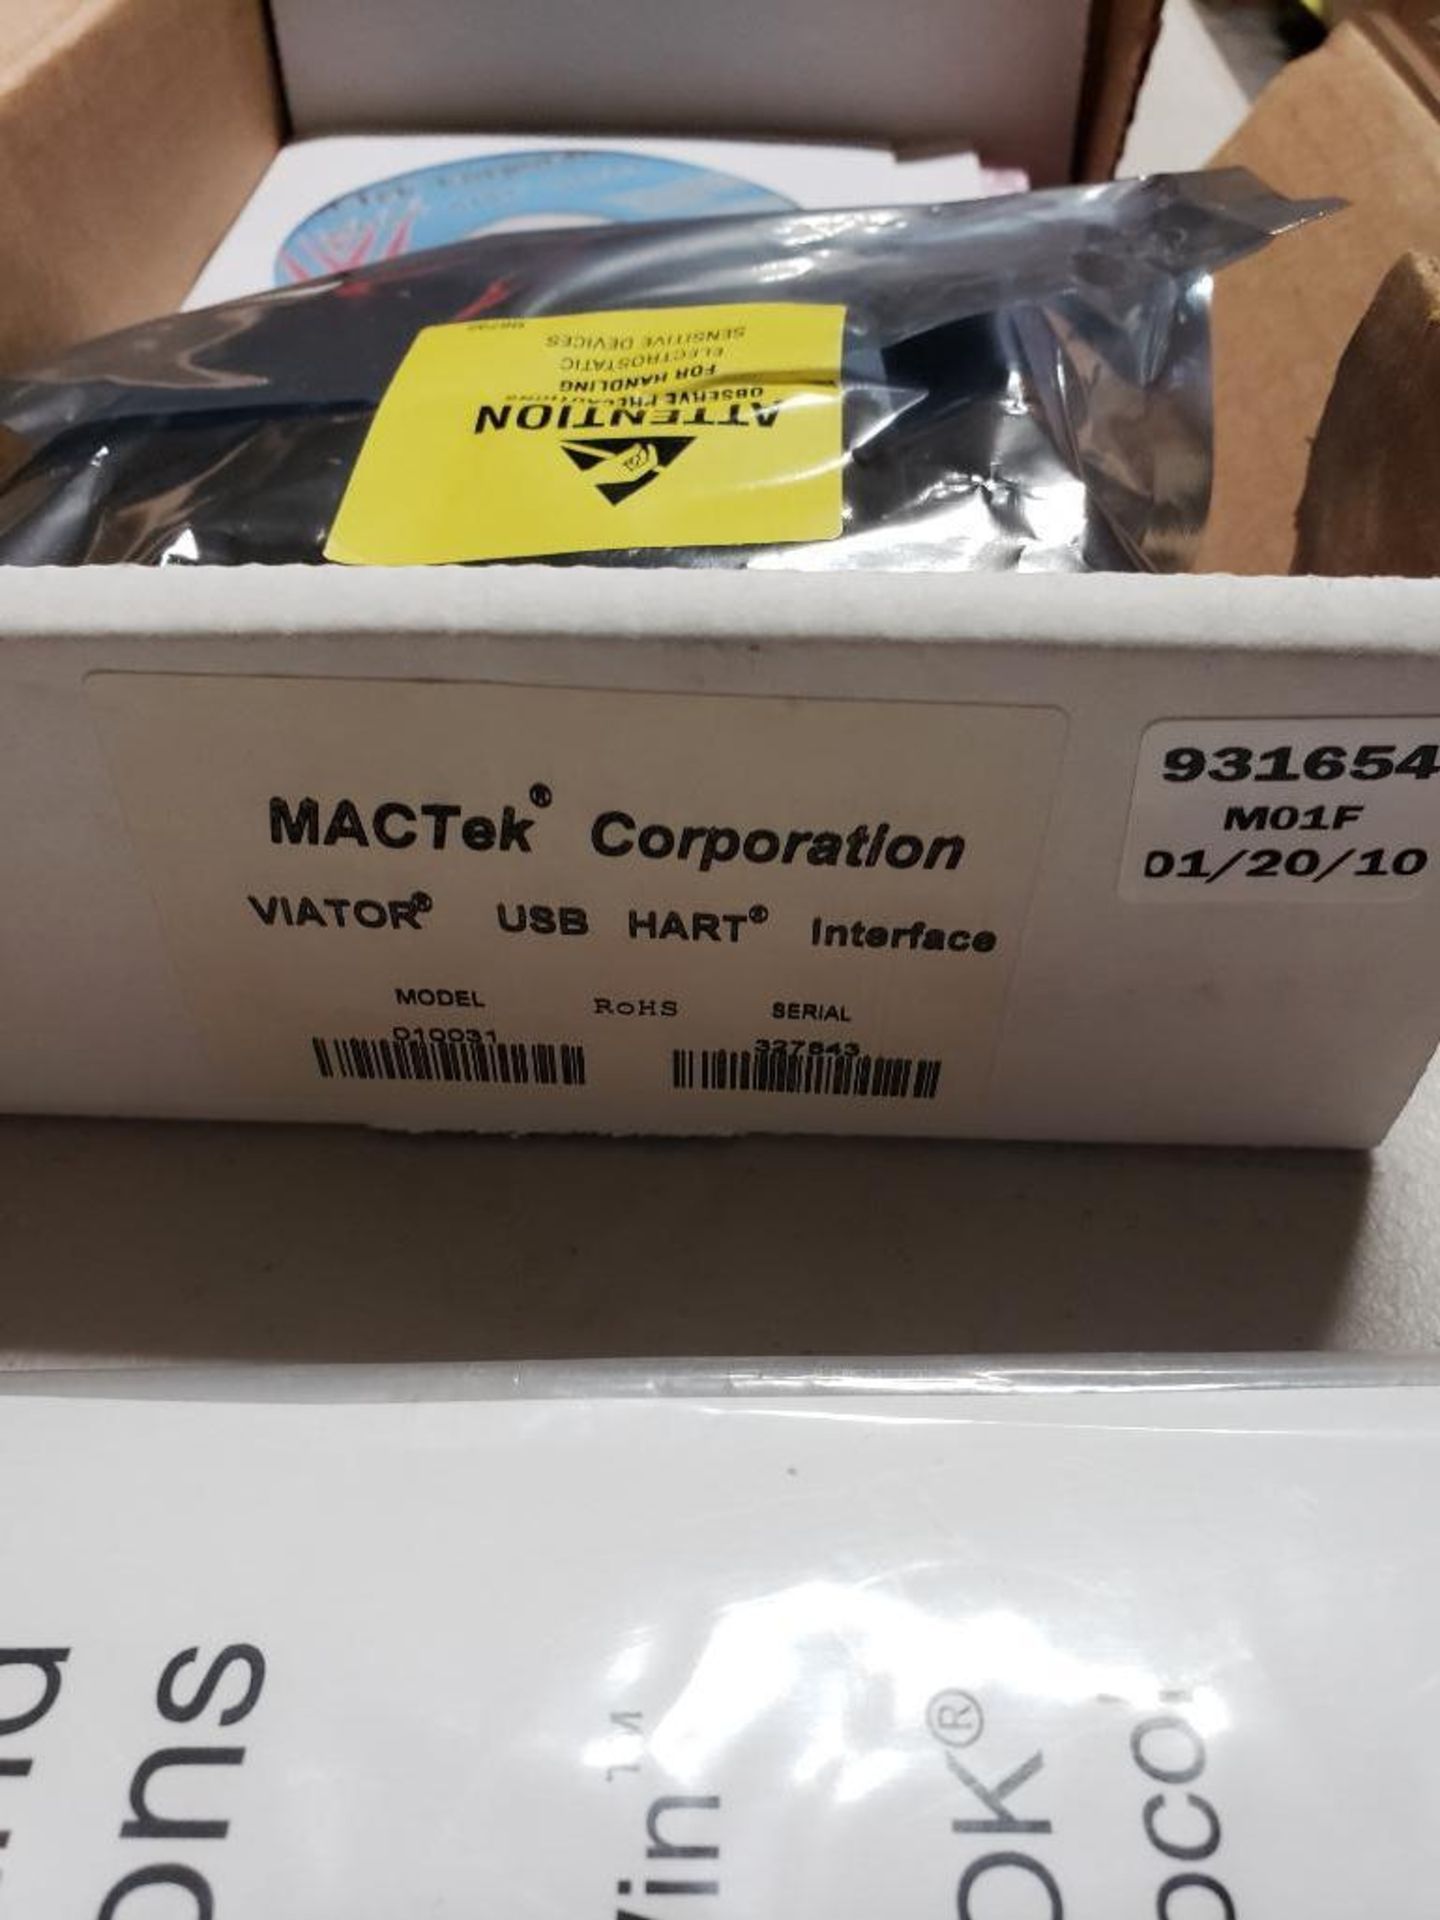 Qty 1 - MacTeck Corp Viator USB Hart Interface model 010031. New in box. - Image 2 of 4